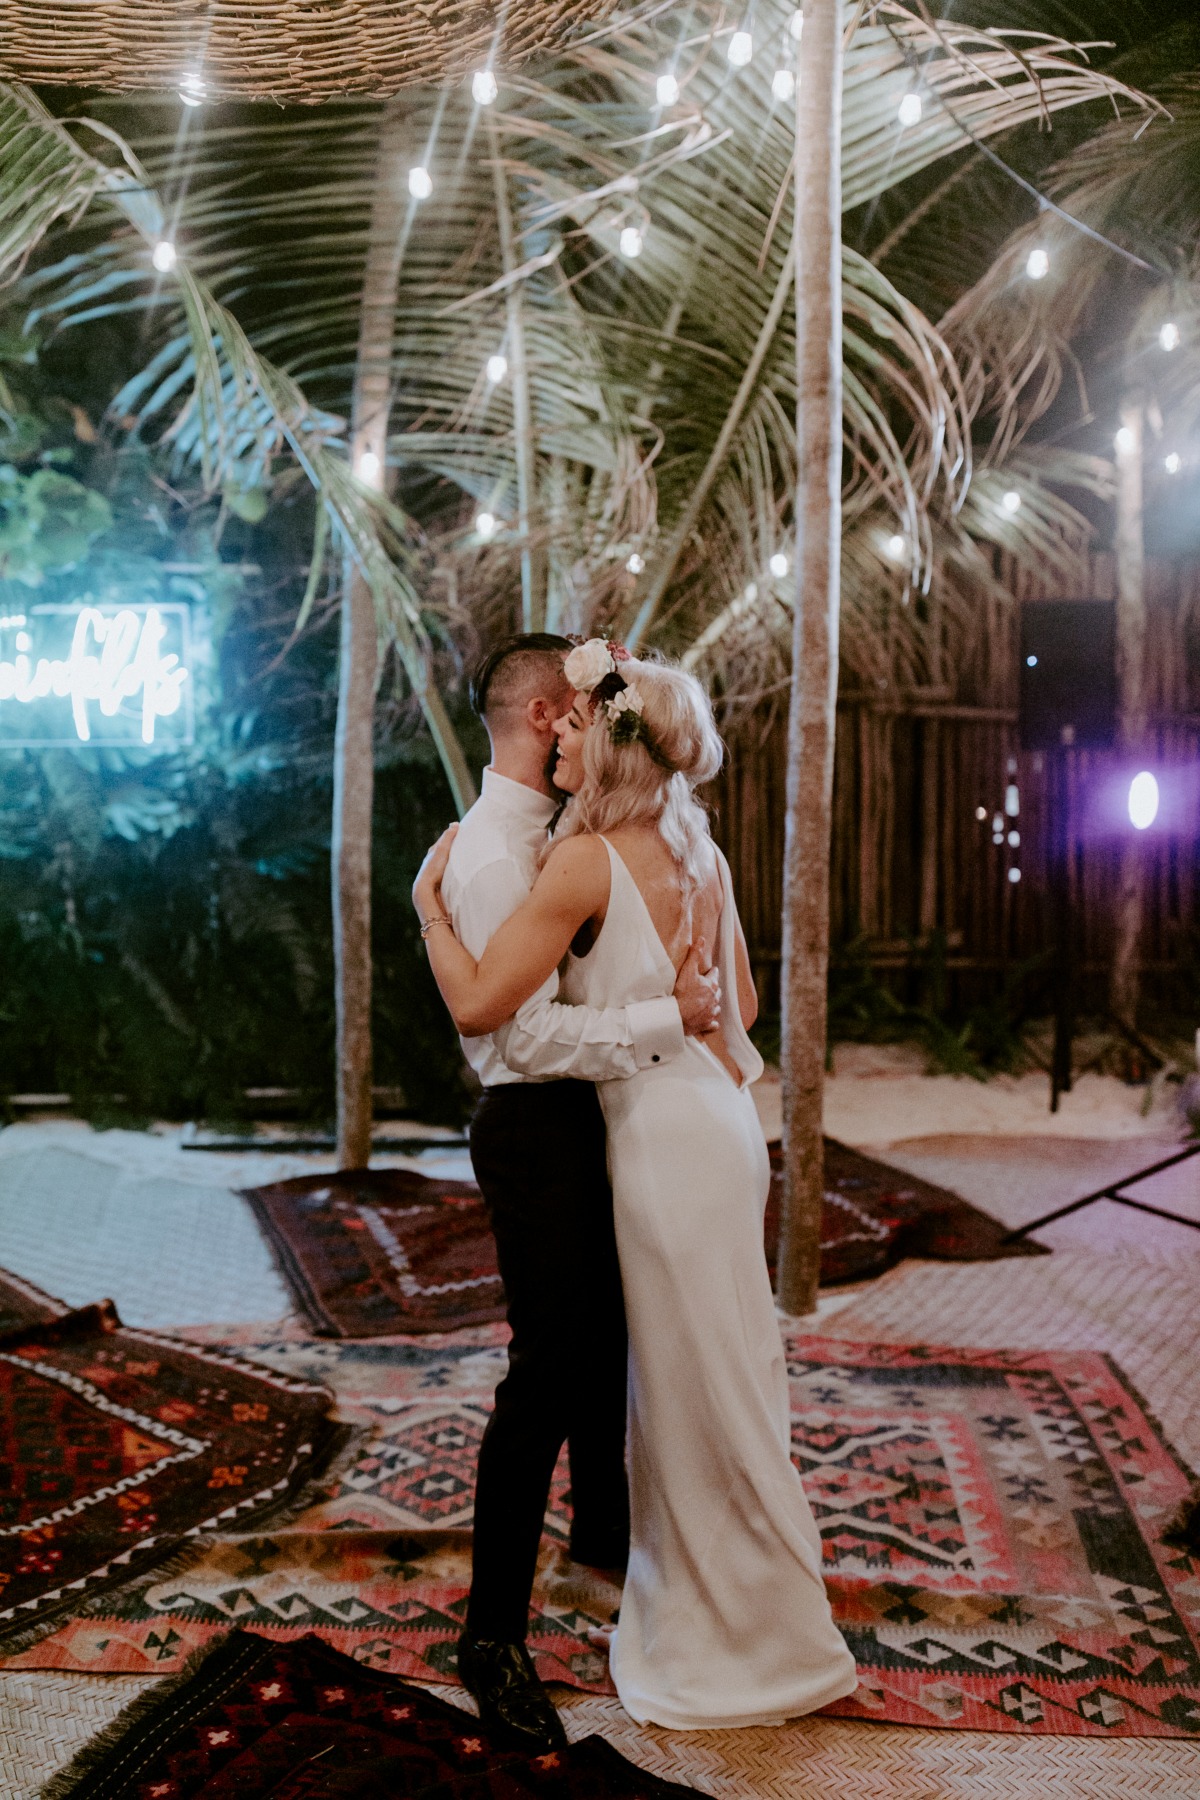 Can You Feel The Love, Tulum?